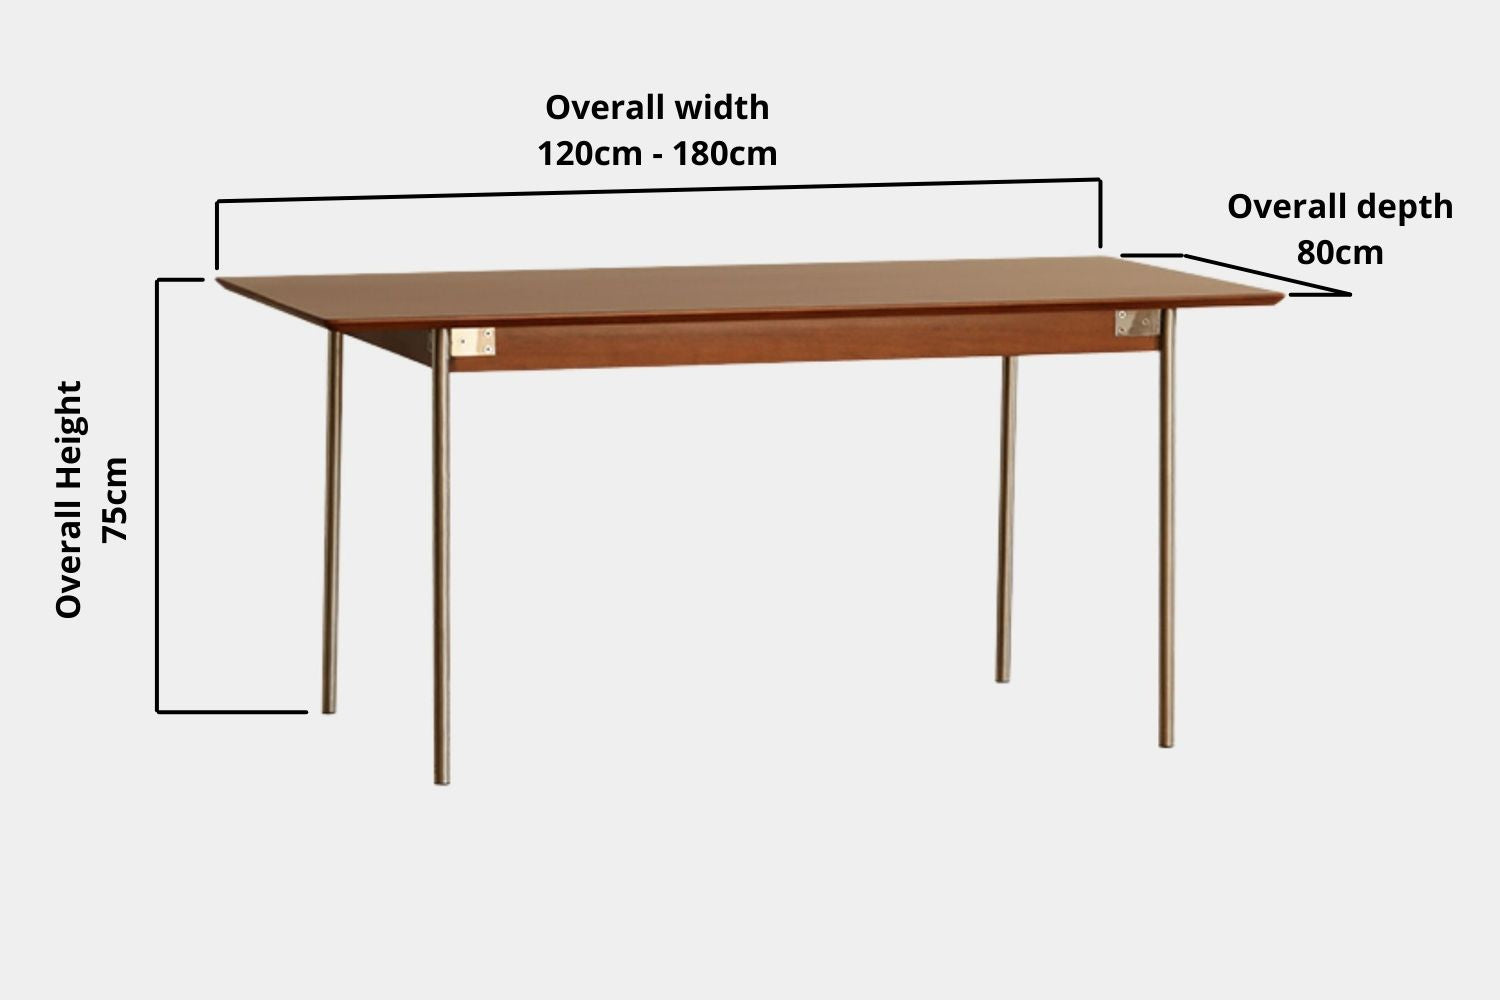 Key product dimensions such as depth, width and height for Taylor Poplar Wood Dining Table Set